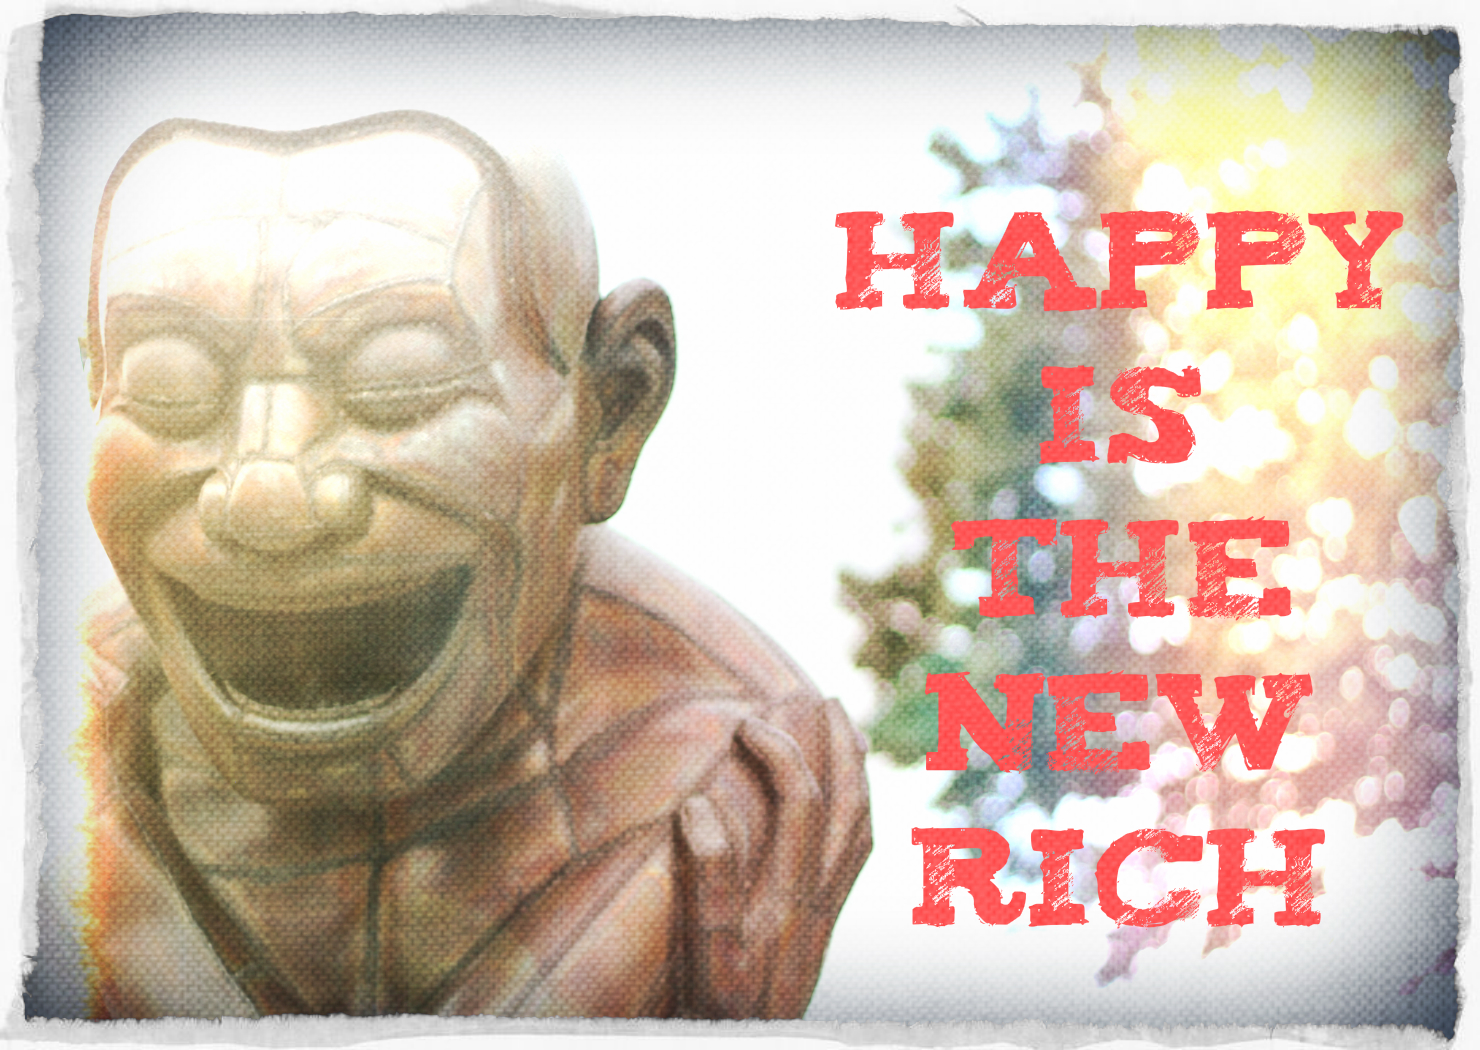 Happy is the new rich